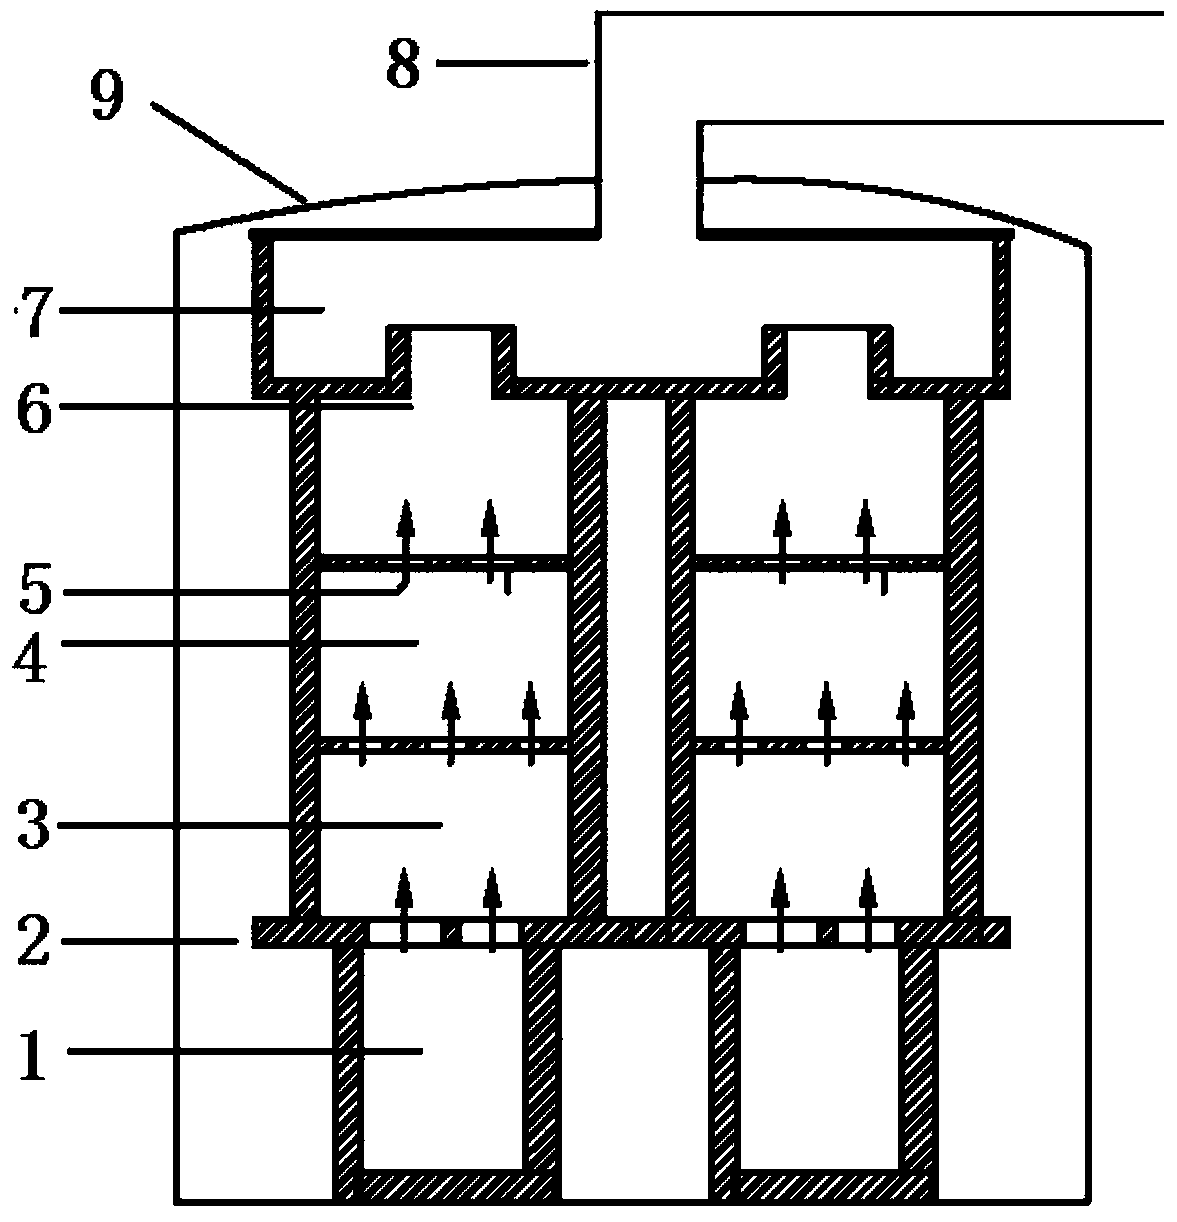 A graphite deposition device for a chemical vapor deposition furnace